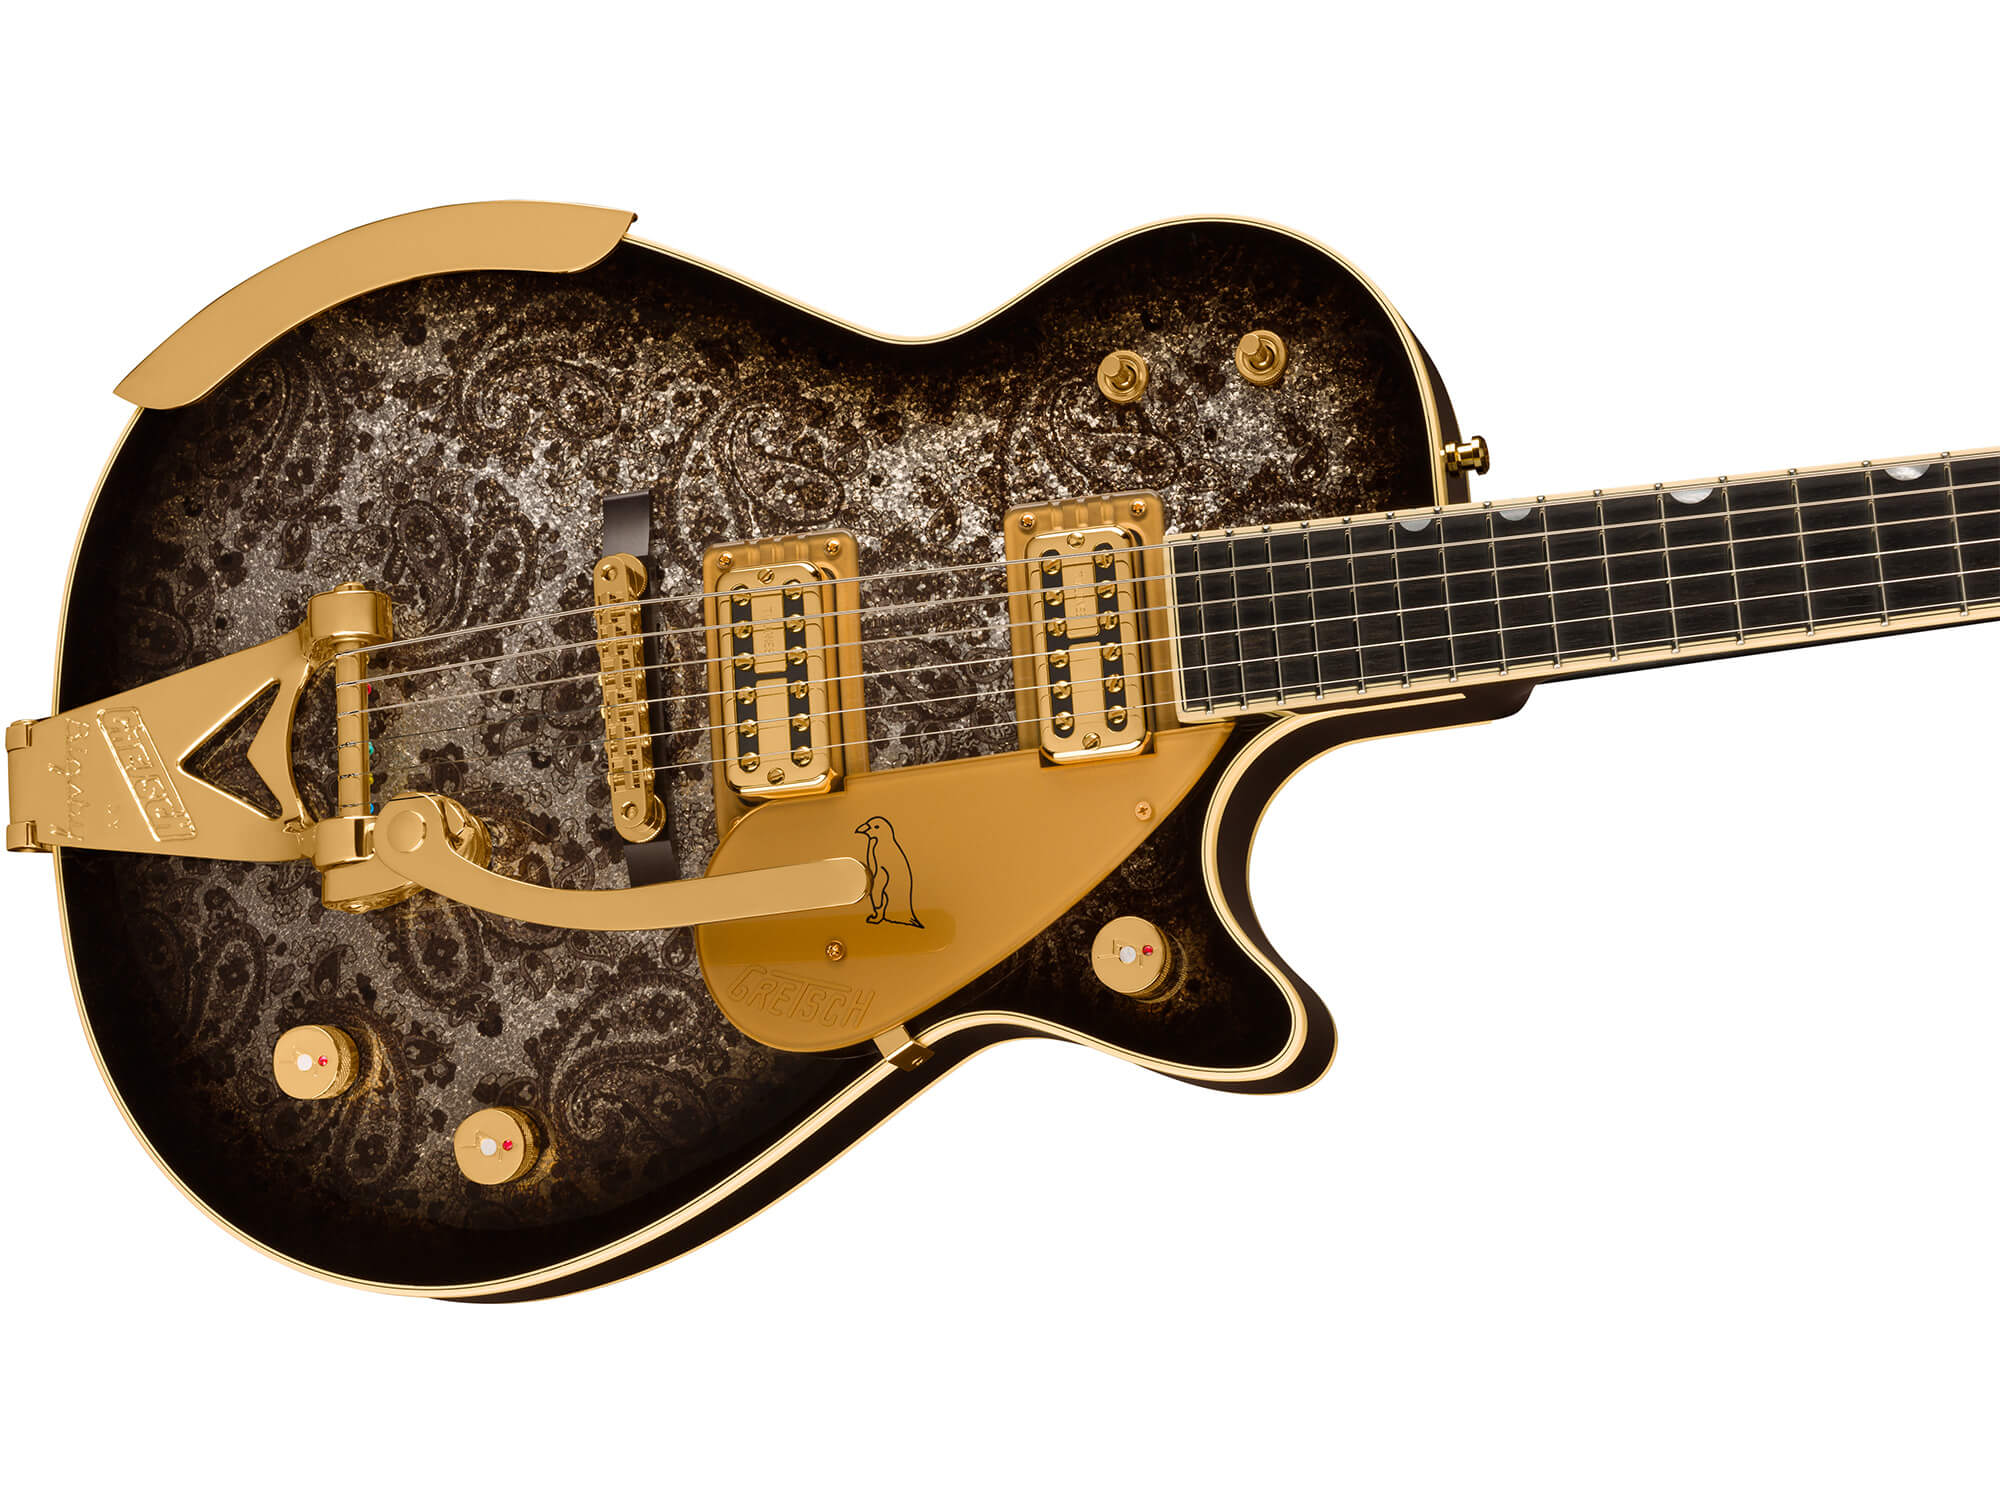 Gretsch Limited Edition Professional Collection Paisley Penguin